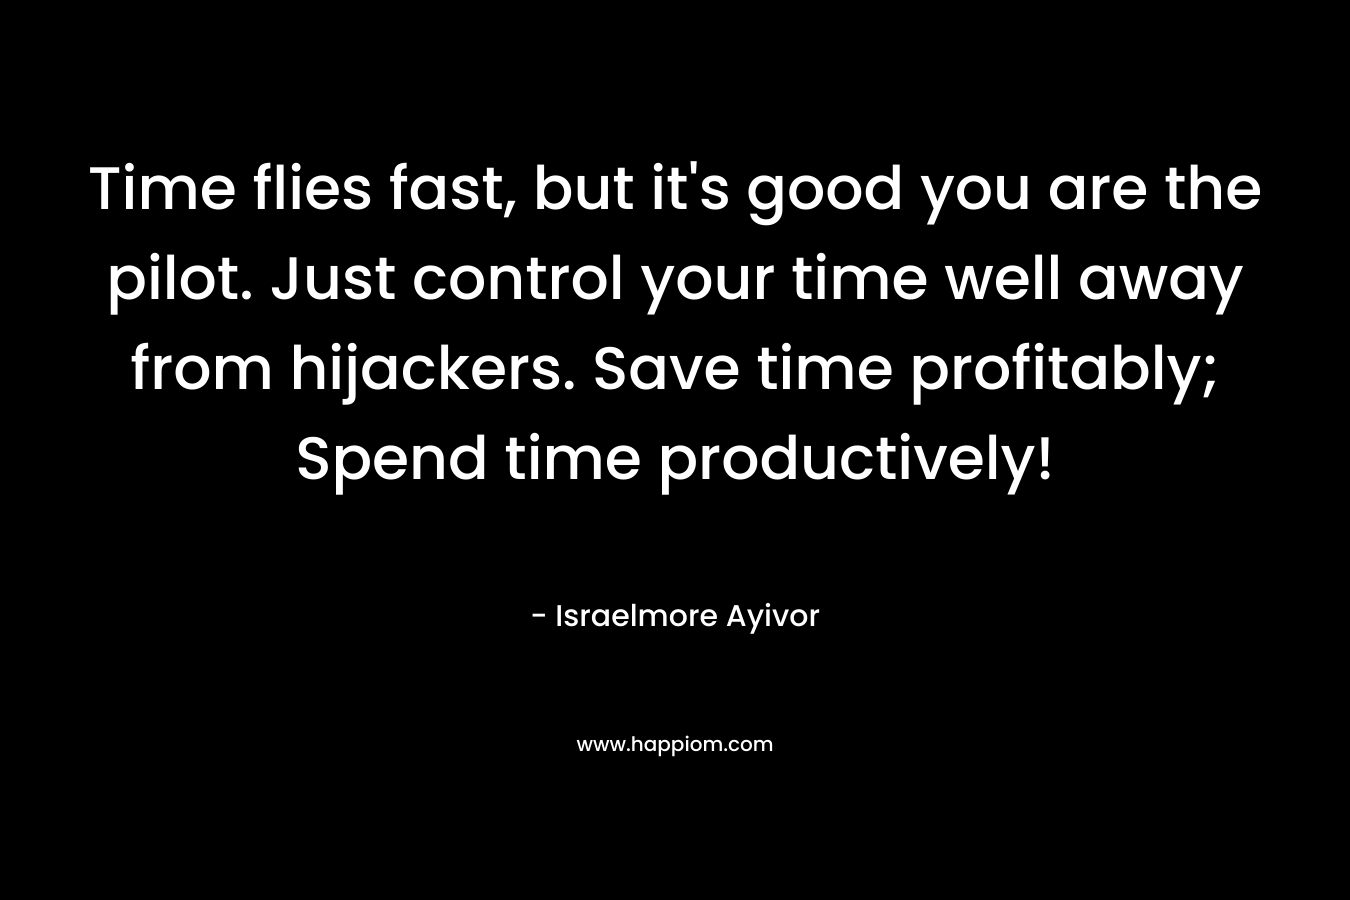 Time flies fast, but it’s good you are the pilot. Just control your time well away from hijackers. Save time profitably; Spend time productively! – Israelmore Ayivor